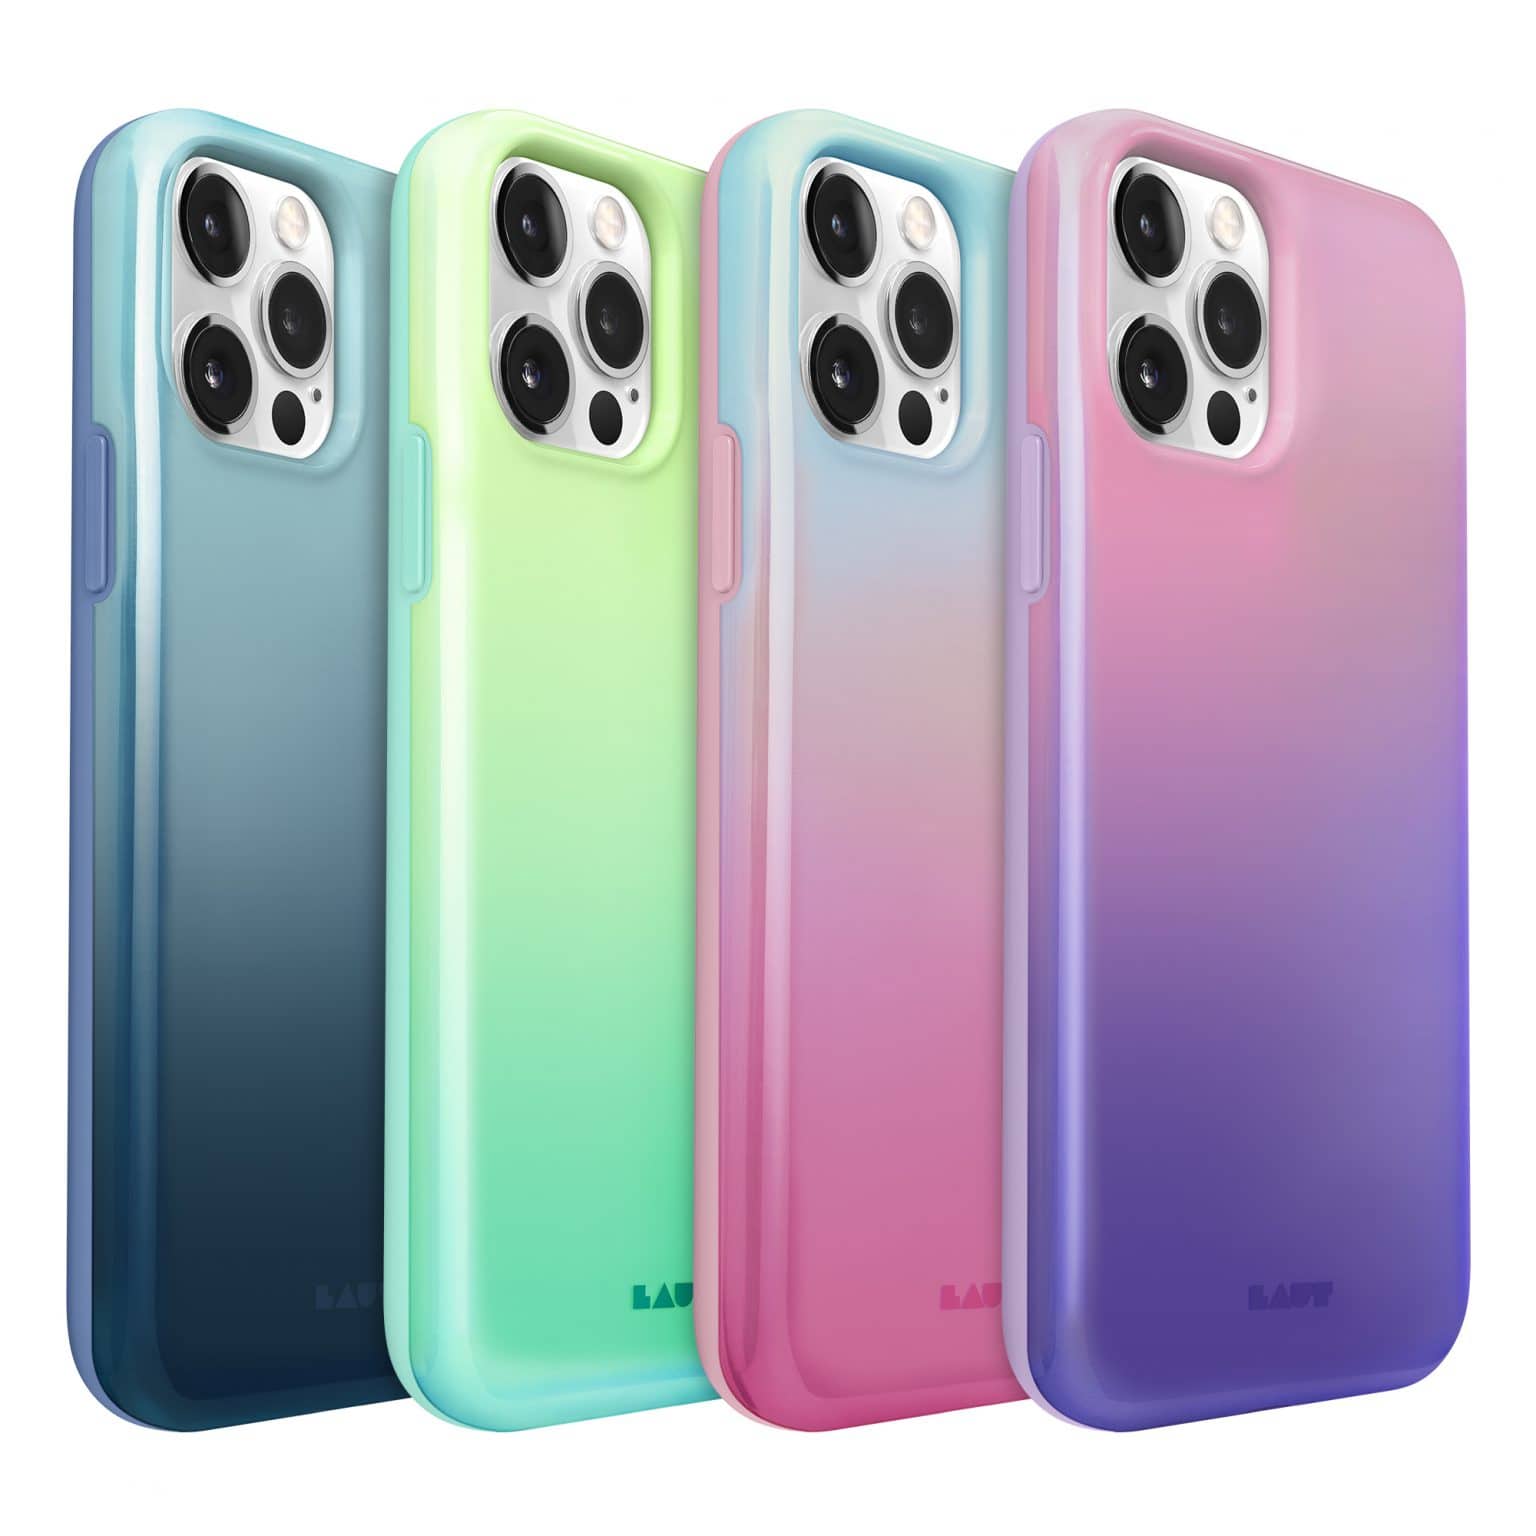 The Huex Fades case for iPhone 12 comes in a variety of iridescent finishes.